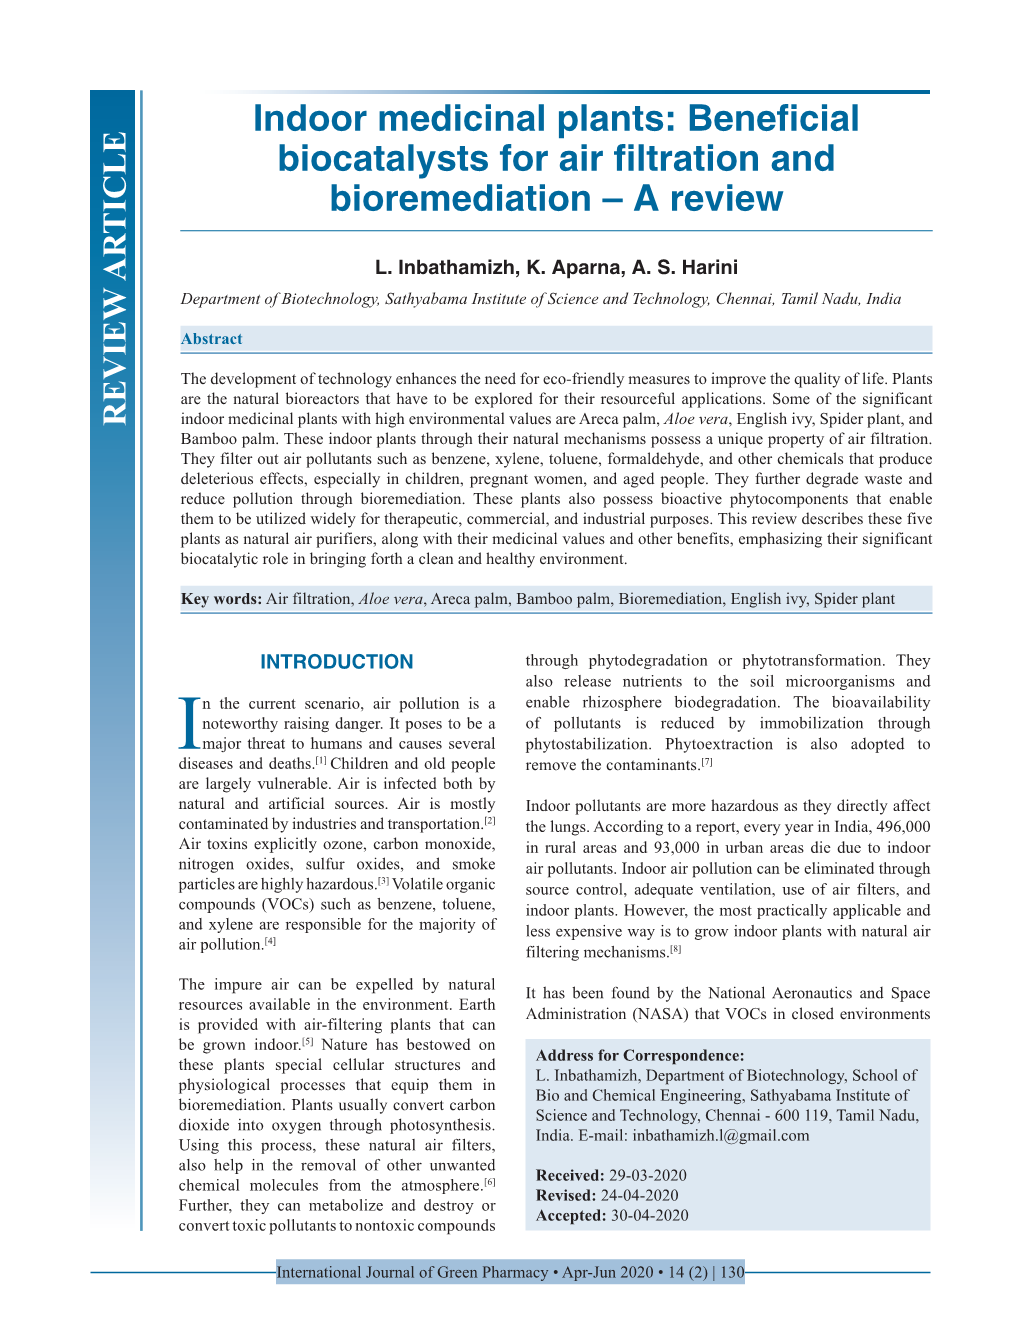 Indoor Medicinal Plants: Beneficial Biocatalysts for Air Filtration and Bioremediation – a Review